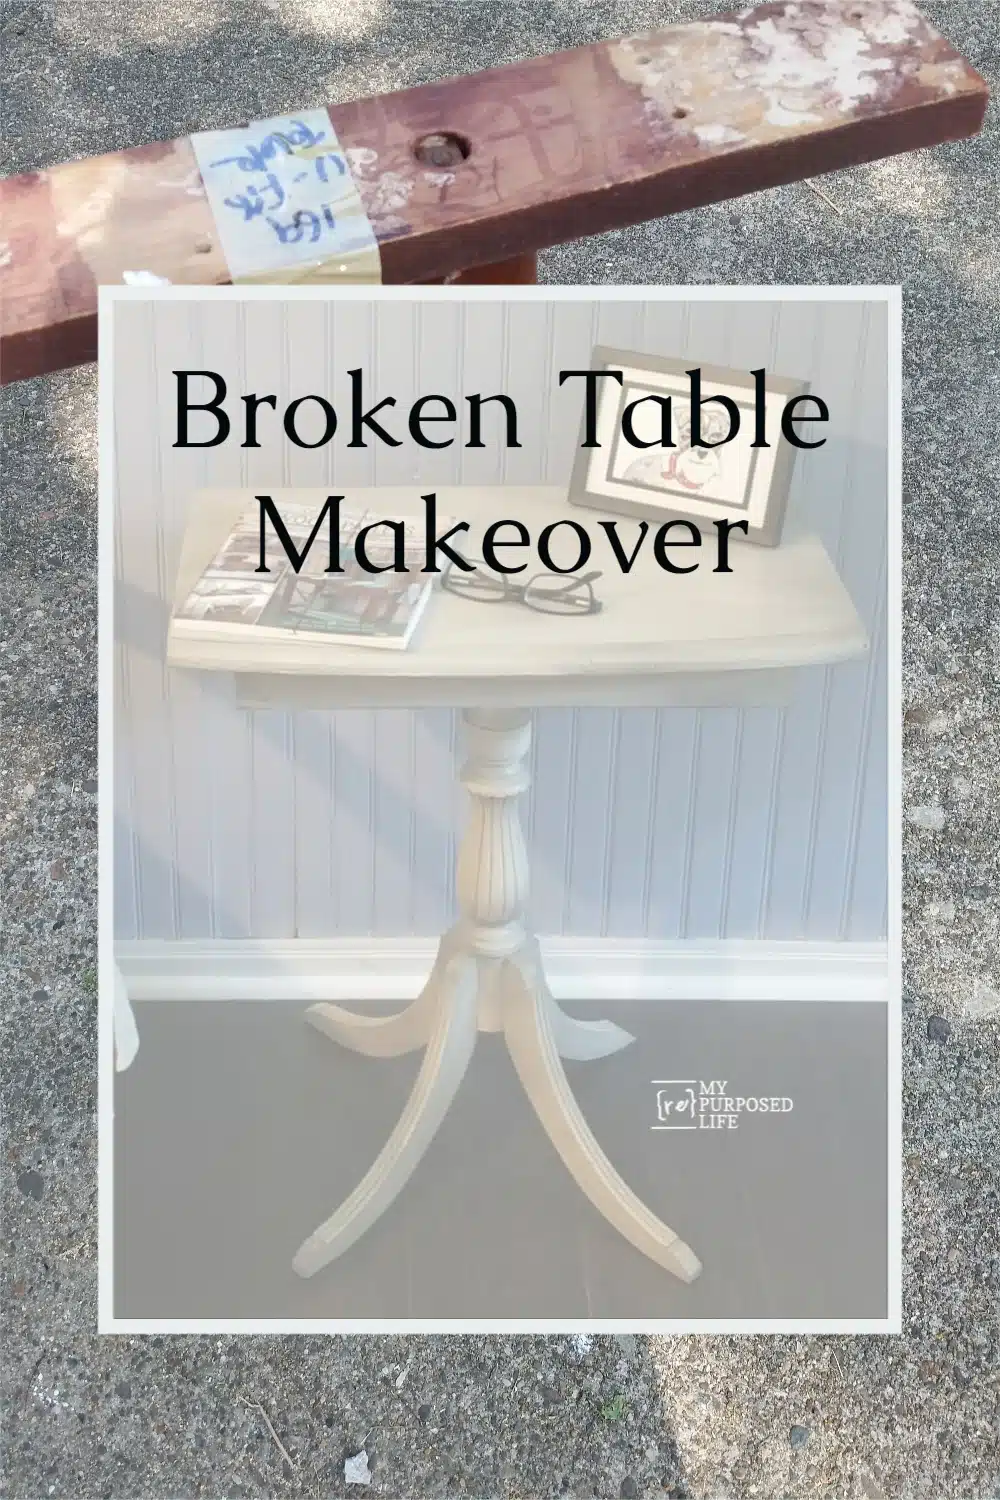 A $1 U Fix it Table gets a second chance with a scrap tabletop. Don't throw it out, fix it! After a little paint and glaze it's ready for it's new home. A cute little four legged claw foot table perfect for any small space. #MyRepurposedLife #repurposed #upcycle #clawfoot #table via @repurposedlife